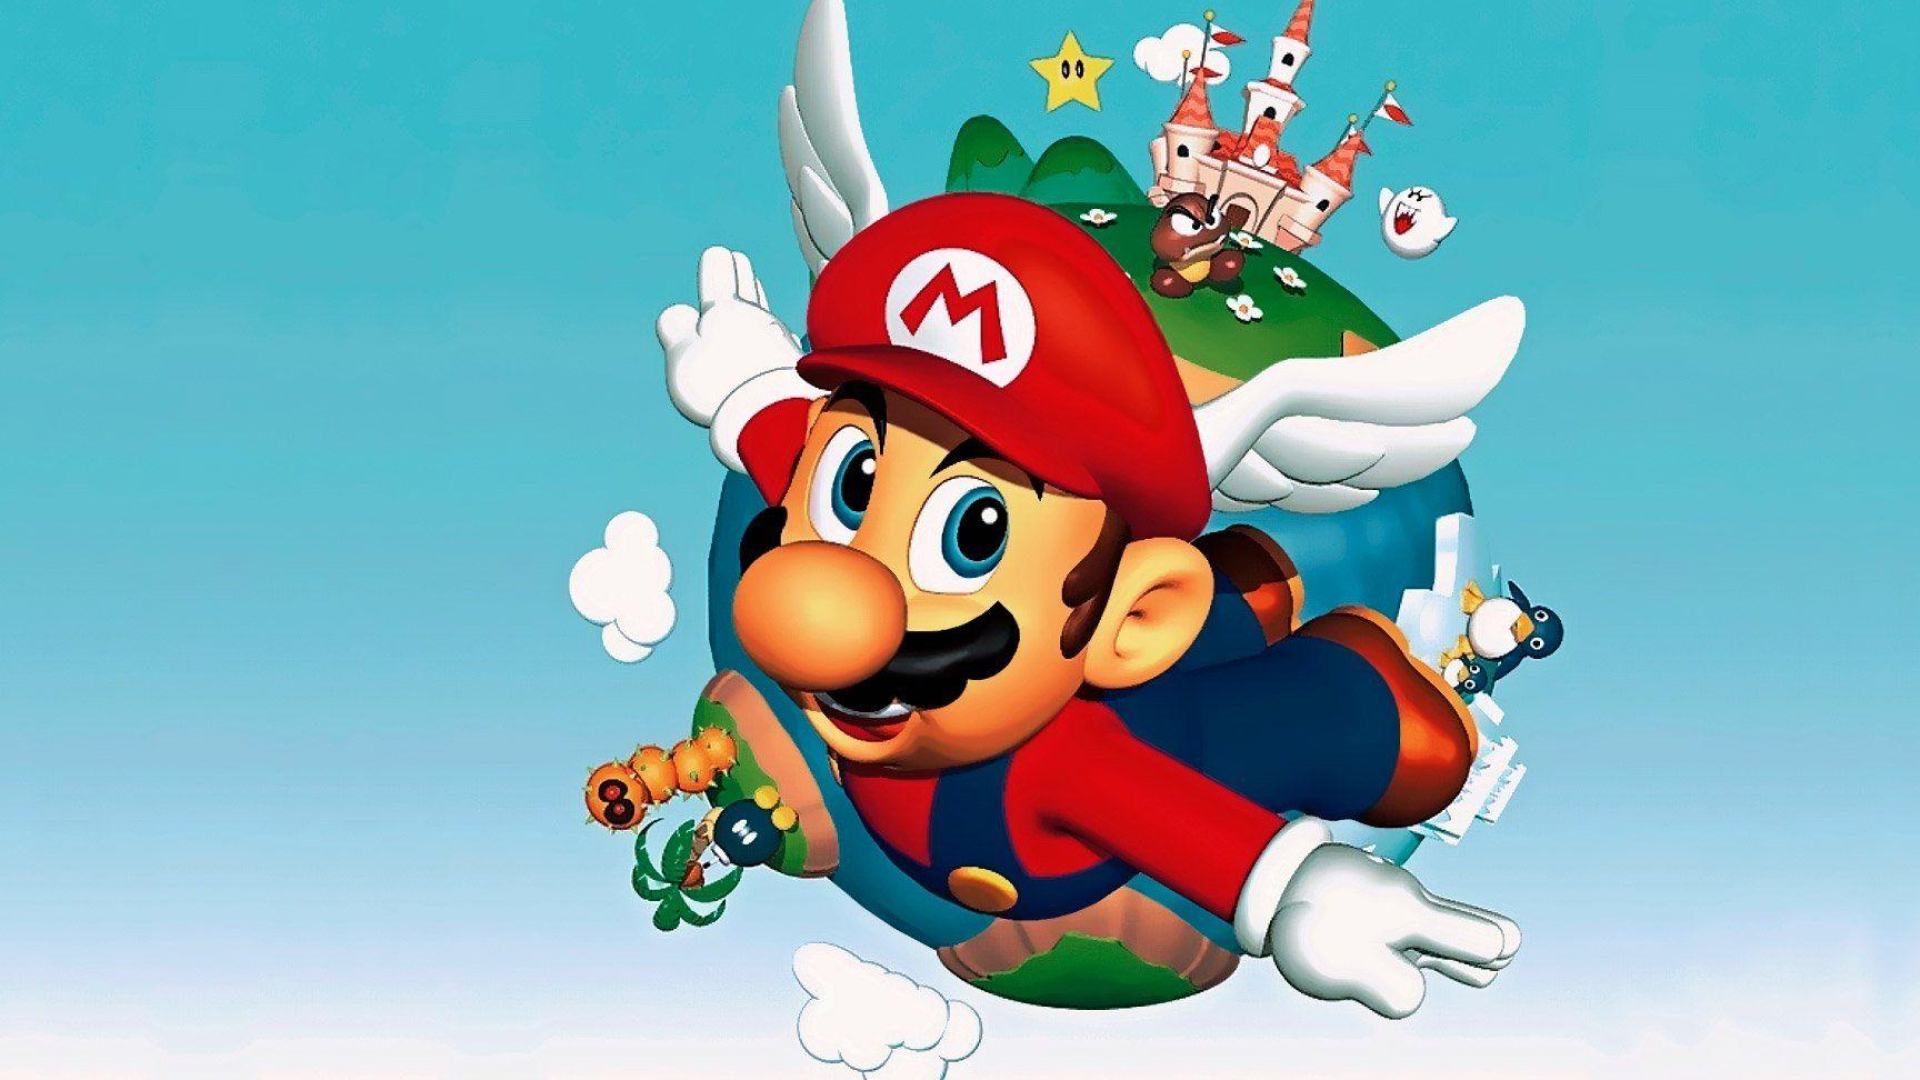 1920x1080 Best Super Mario 3D All-Stars Wallpapers You Need for Your Desktop Background